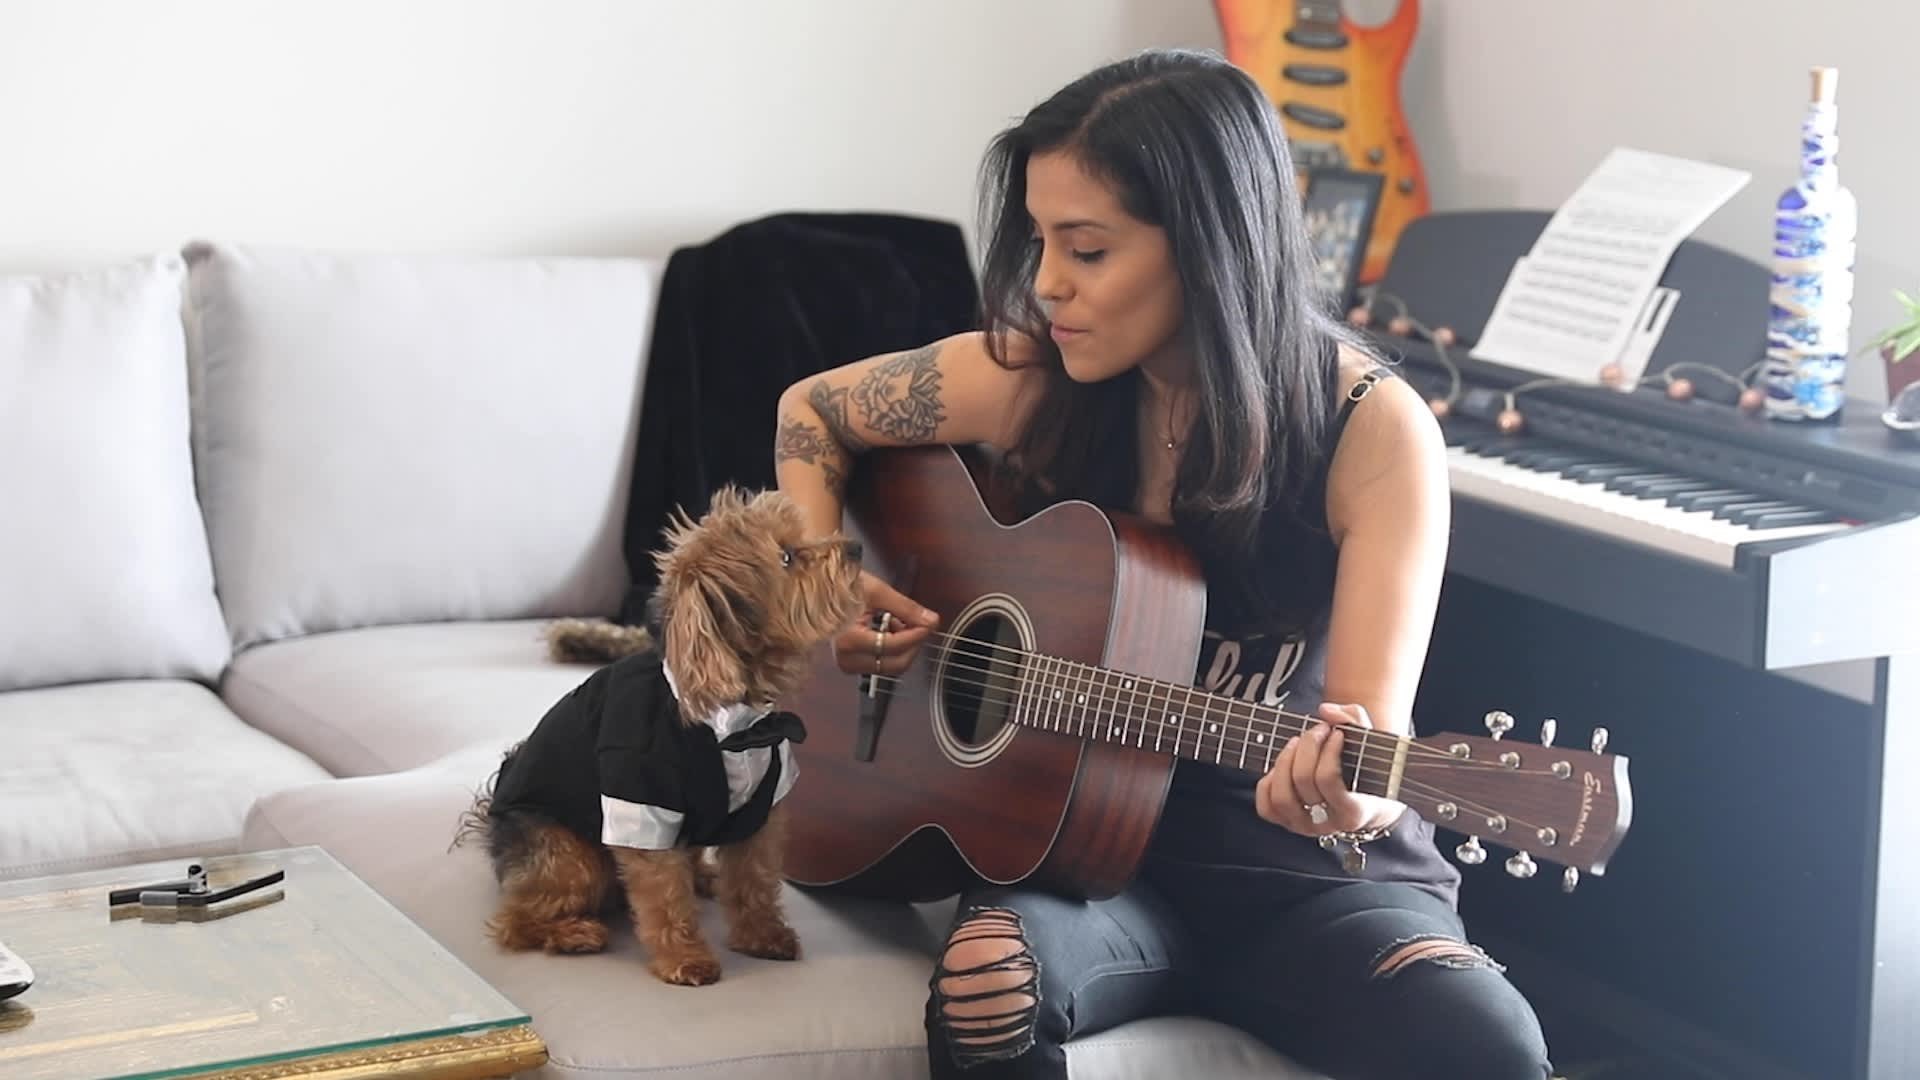 Andrea Contreras plays guitar with her dog, Kuzco, in her apartment.